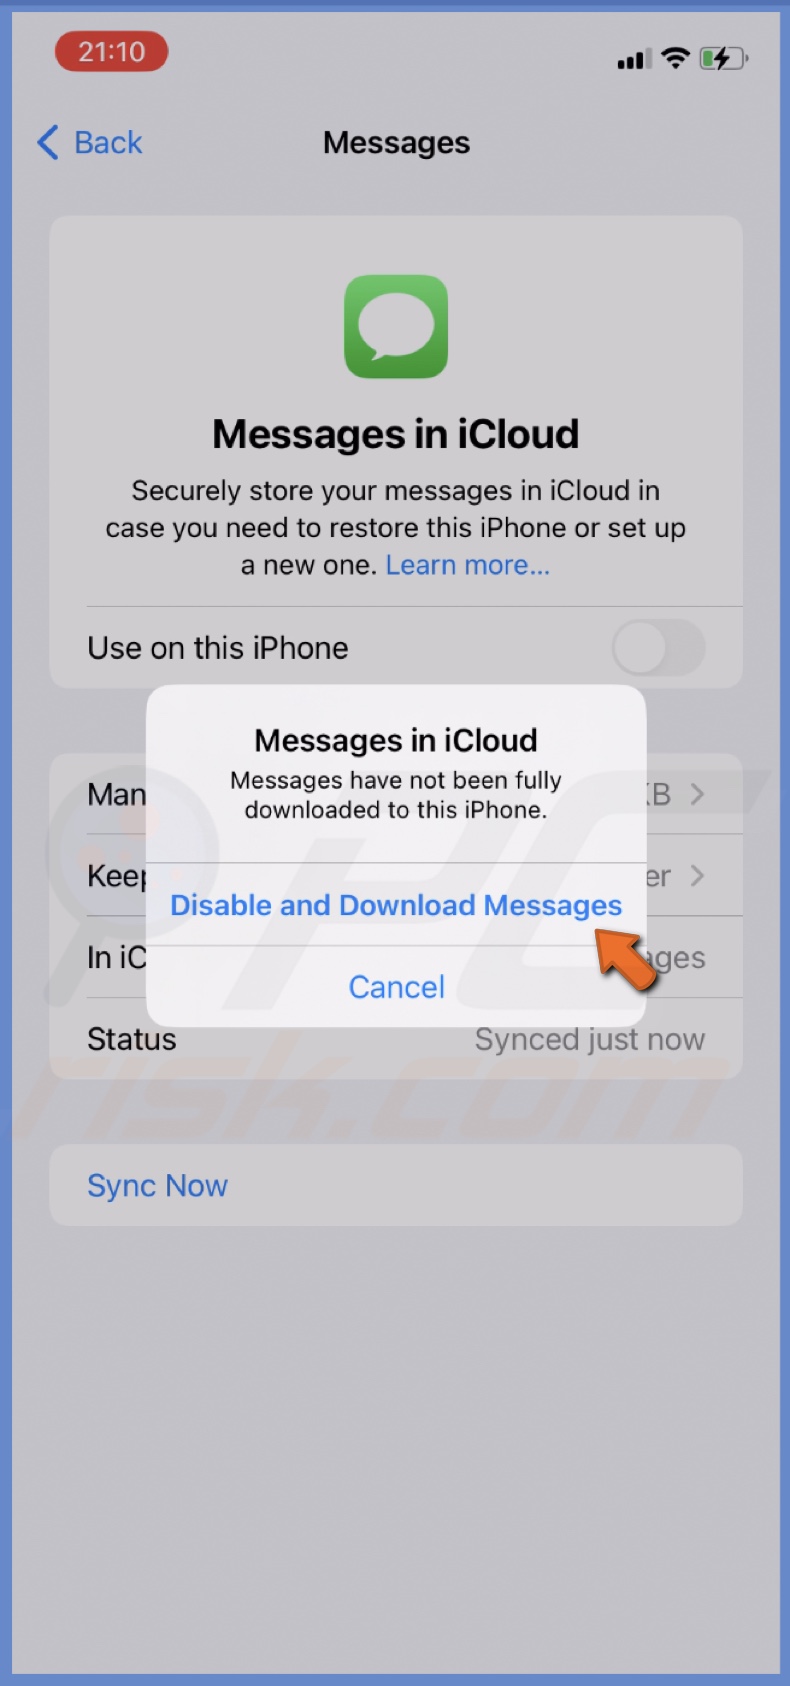 Disable and Download Messages